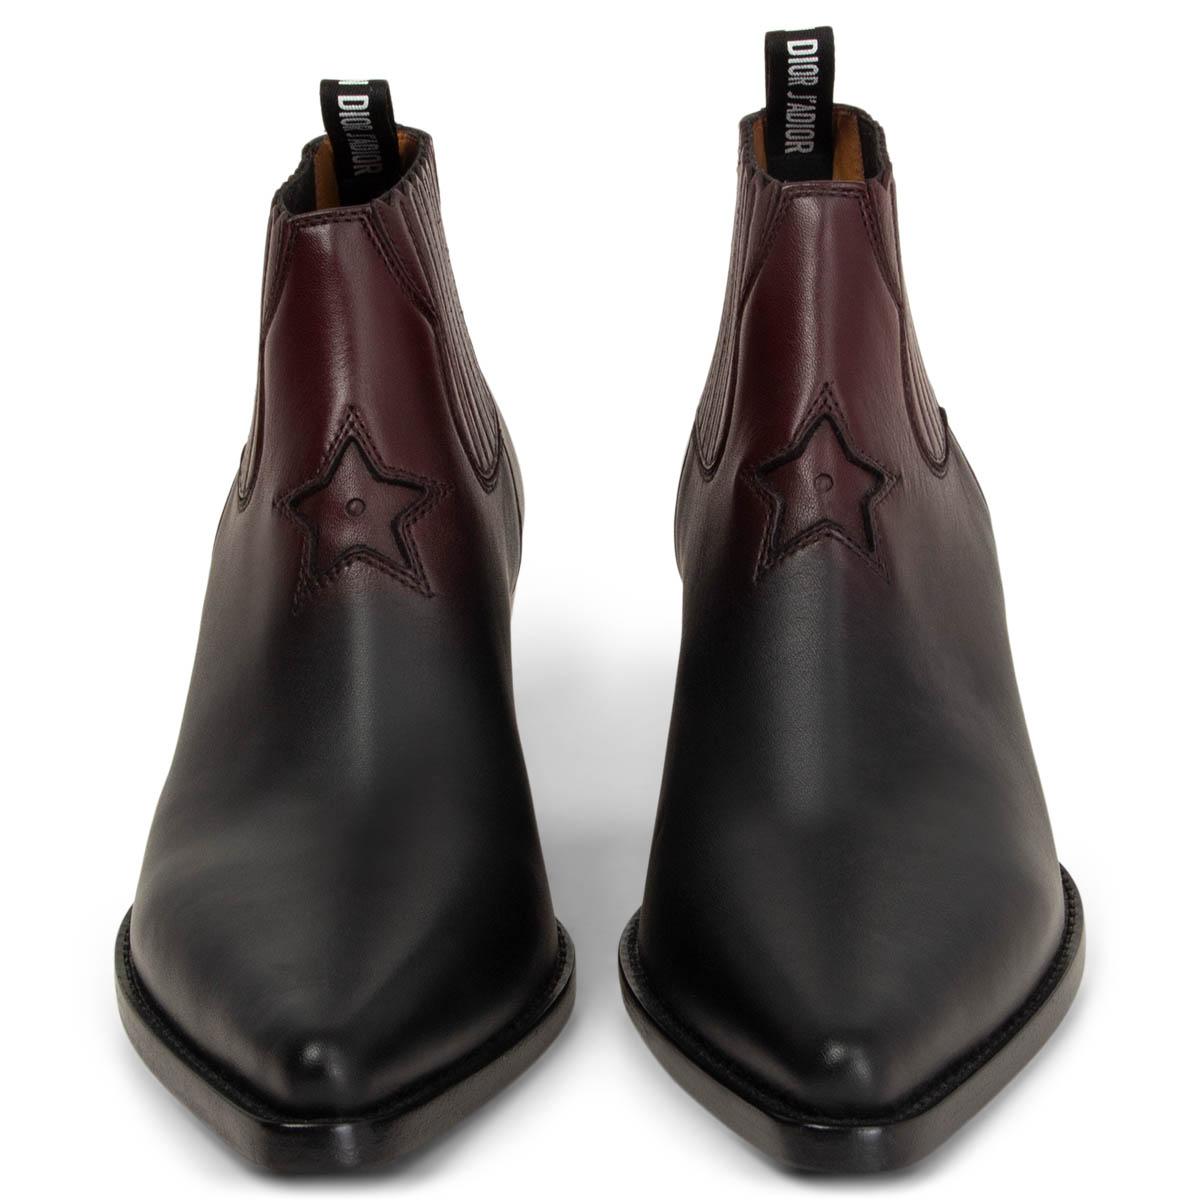 100% authentic Christian Dior star ankle cowboy boots in black and burgundy calfskin featuring a pointed toe and logo pull tab at the rear with decorative star detail to the front. Elastic inserts on the side. Brand new. Rubber sole got added. Come